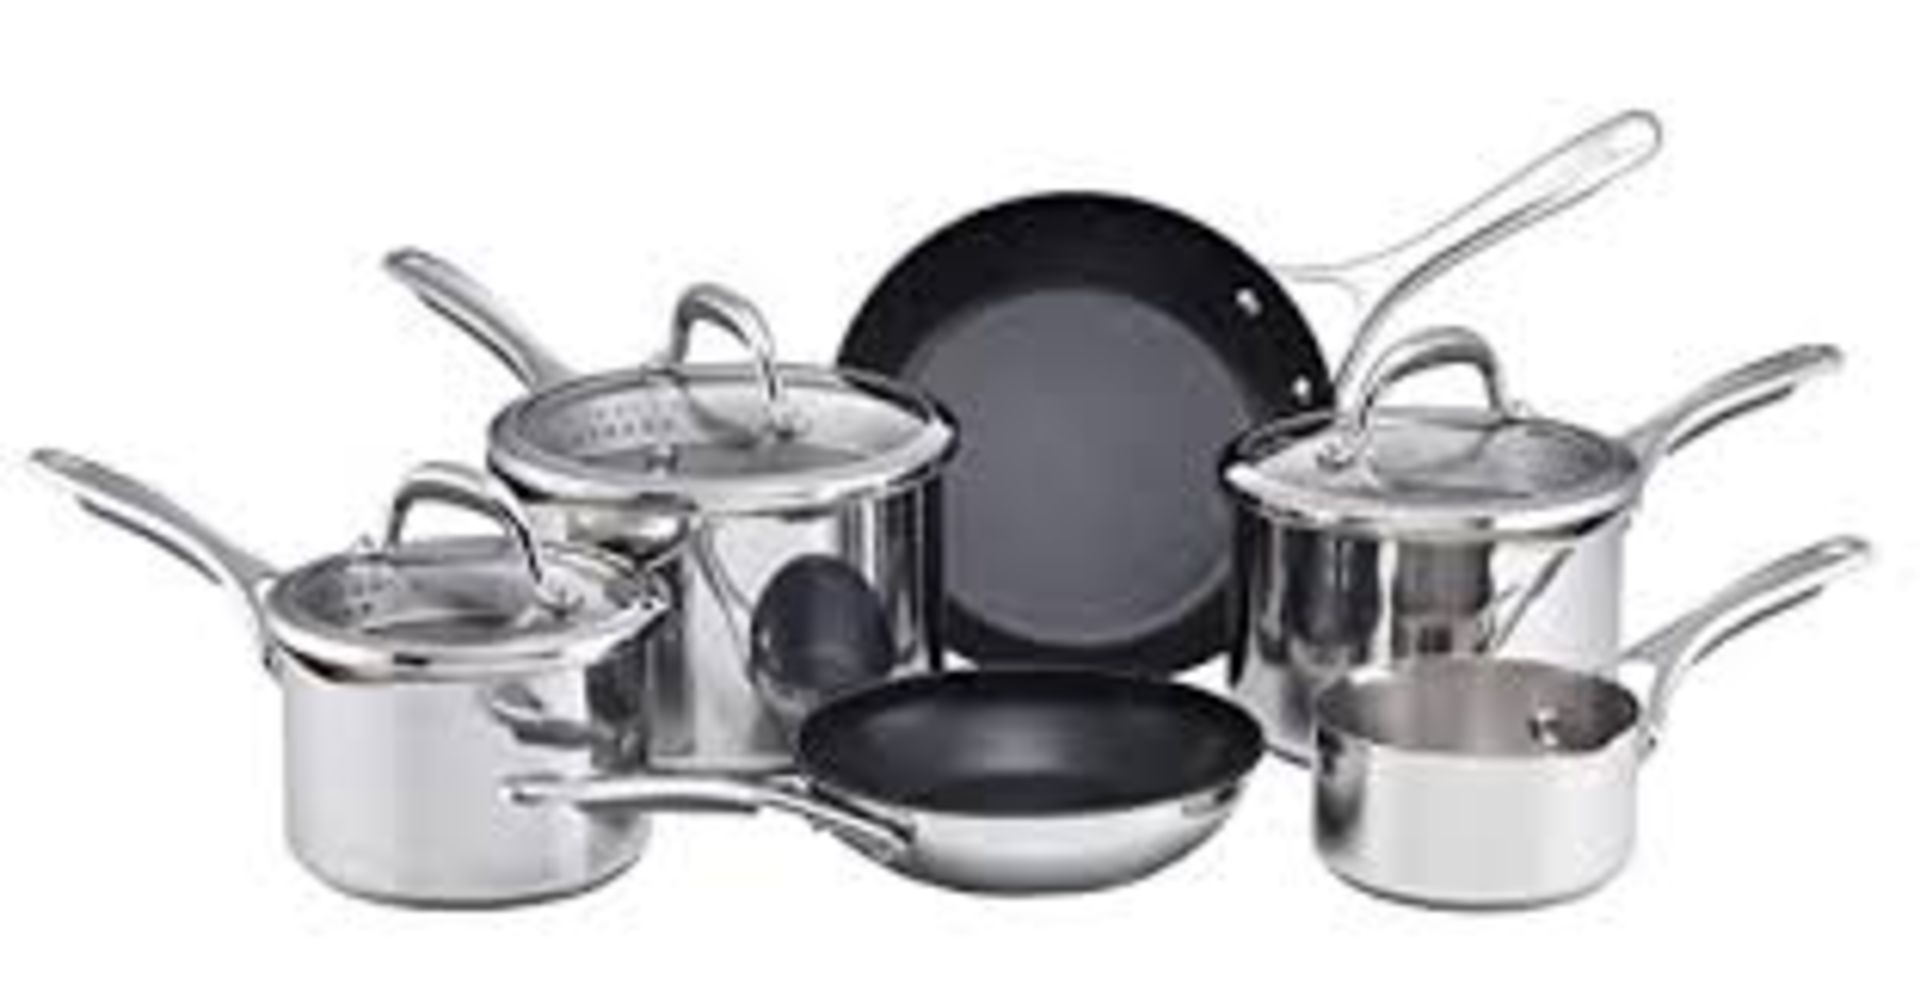 Boxed Meyer 6 Piece Stainless Steel Cookware Set RRP £80 (18604) (Appraisals Available Upon